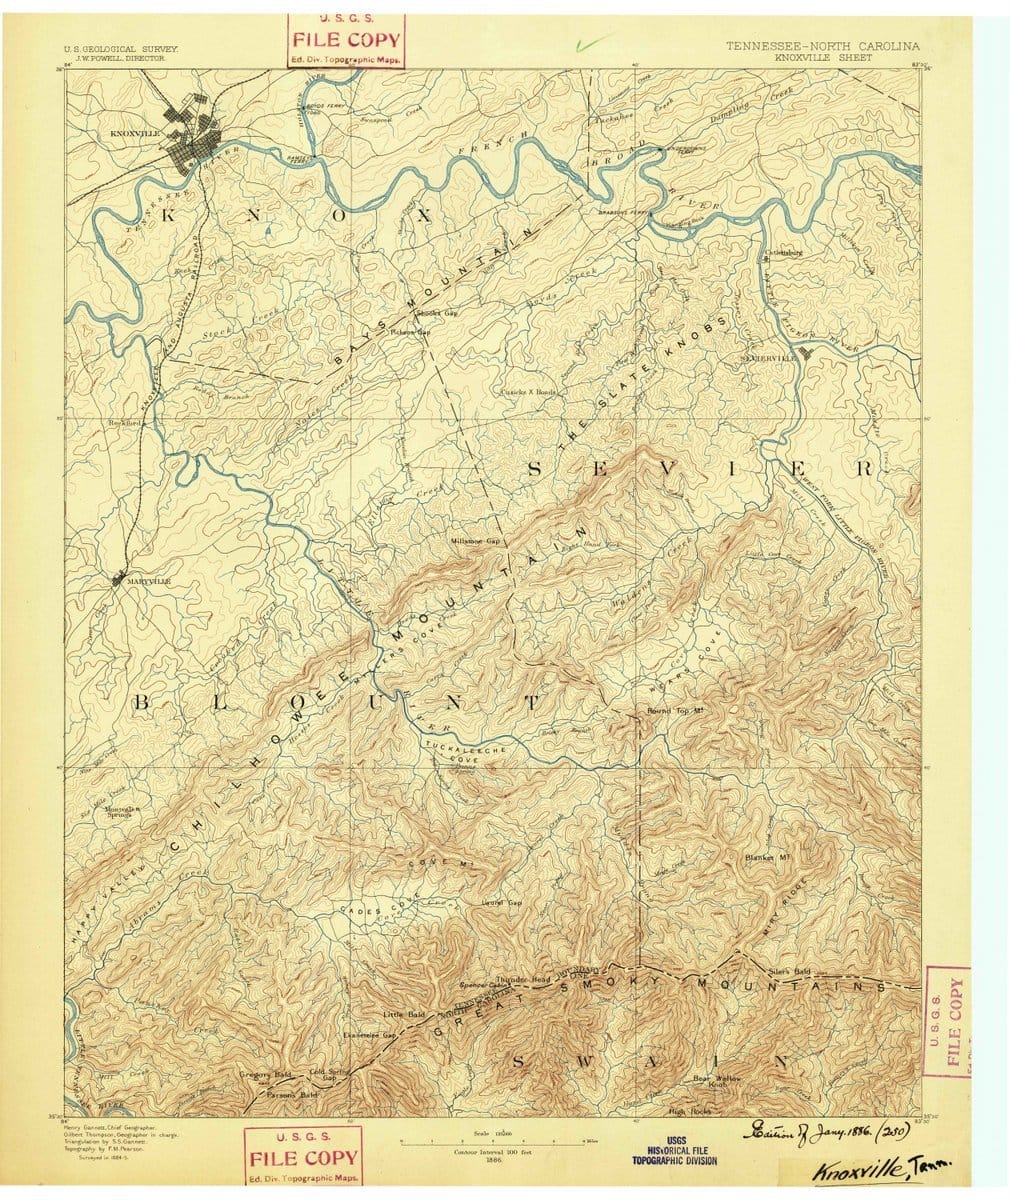 1886 Knoxville, TN -Tennessee-USGS Topographic Map | HistoricPictoric